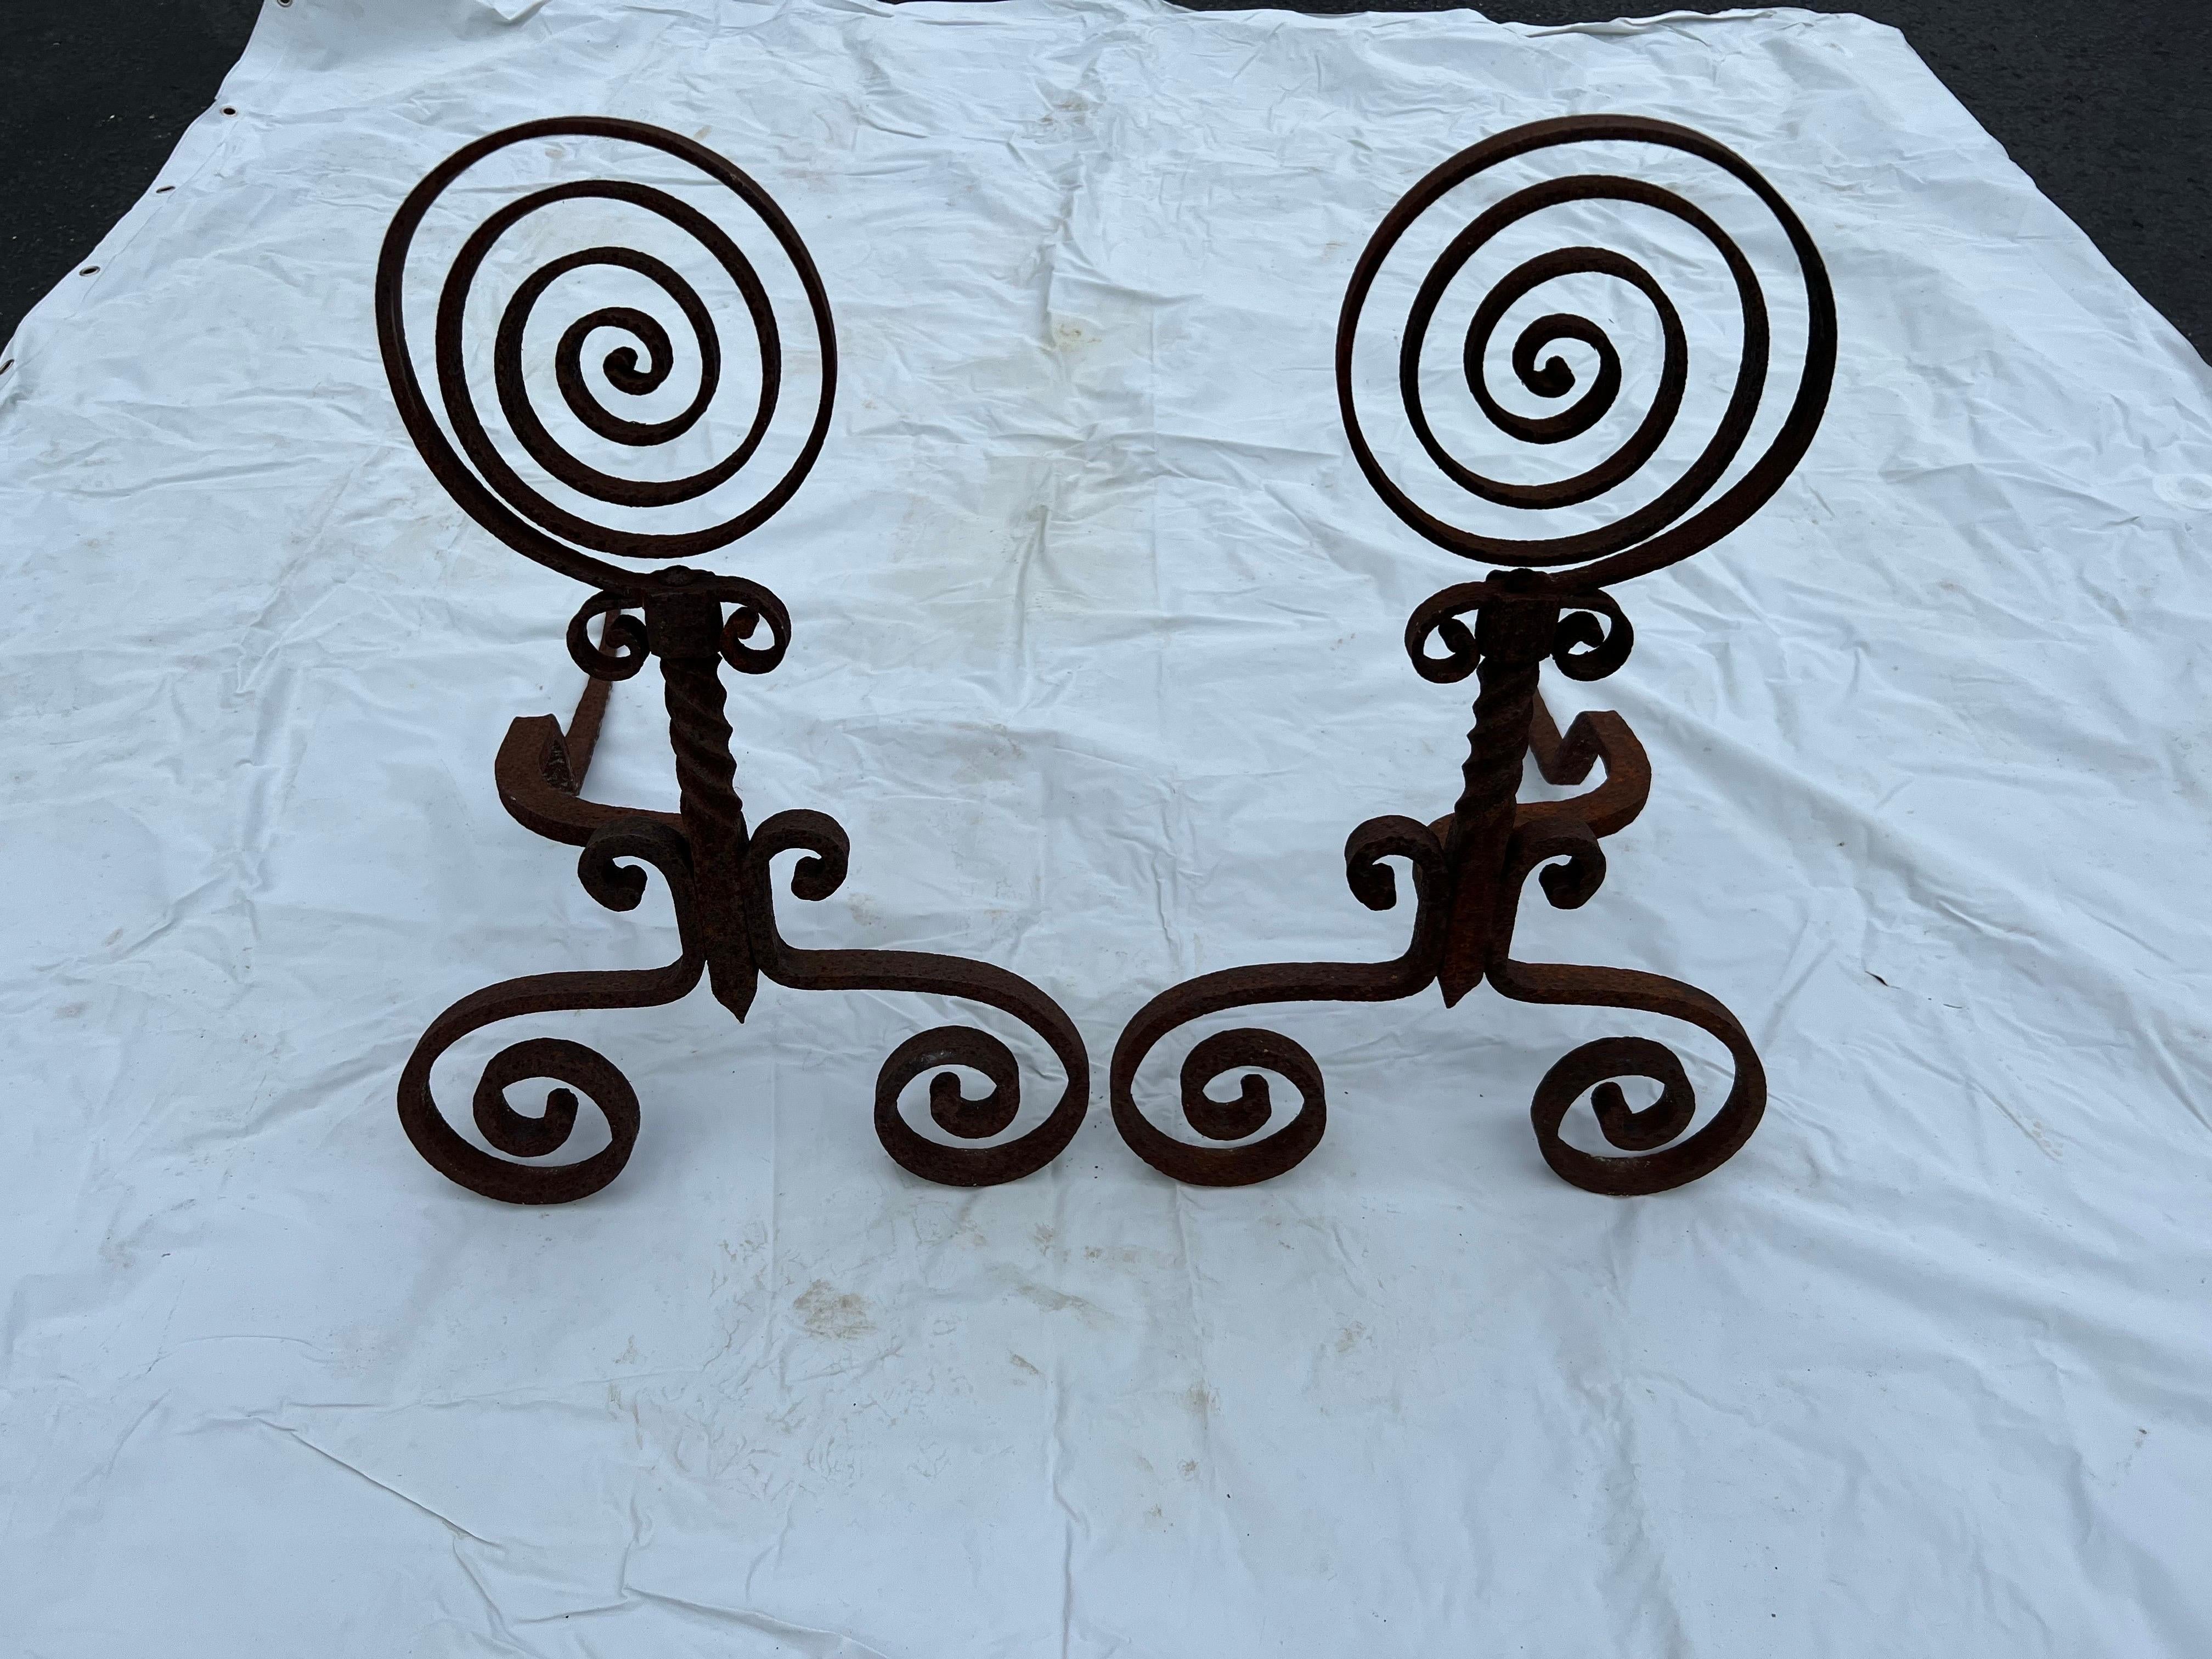 Pair of Spiral Iron Fireplace Andirons. Primitive in style. Simple, round geometric spiral design. Please confirm dimensions prior to purchase. These can parcel ship very economically.